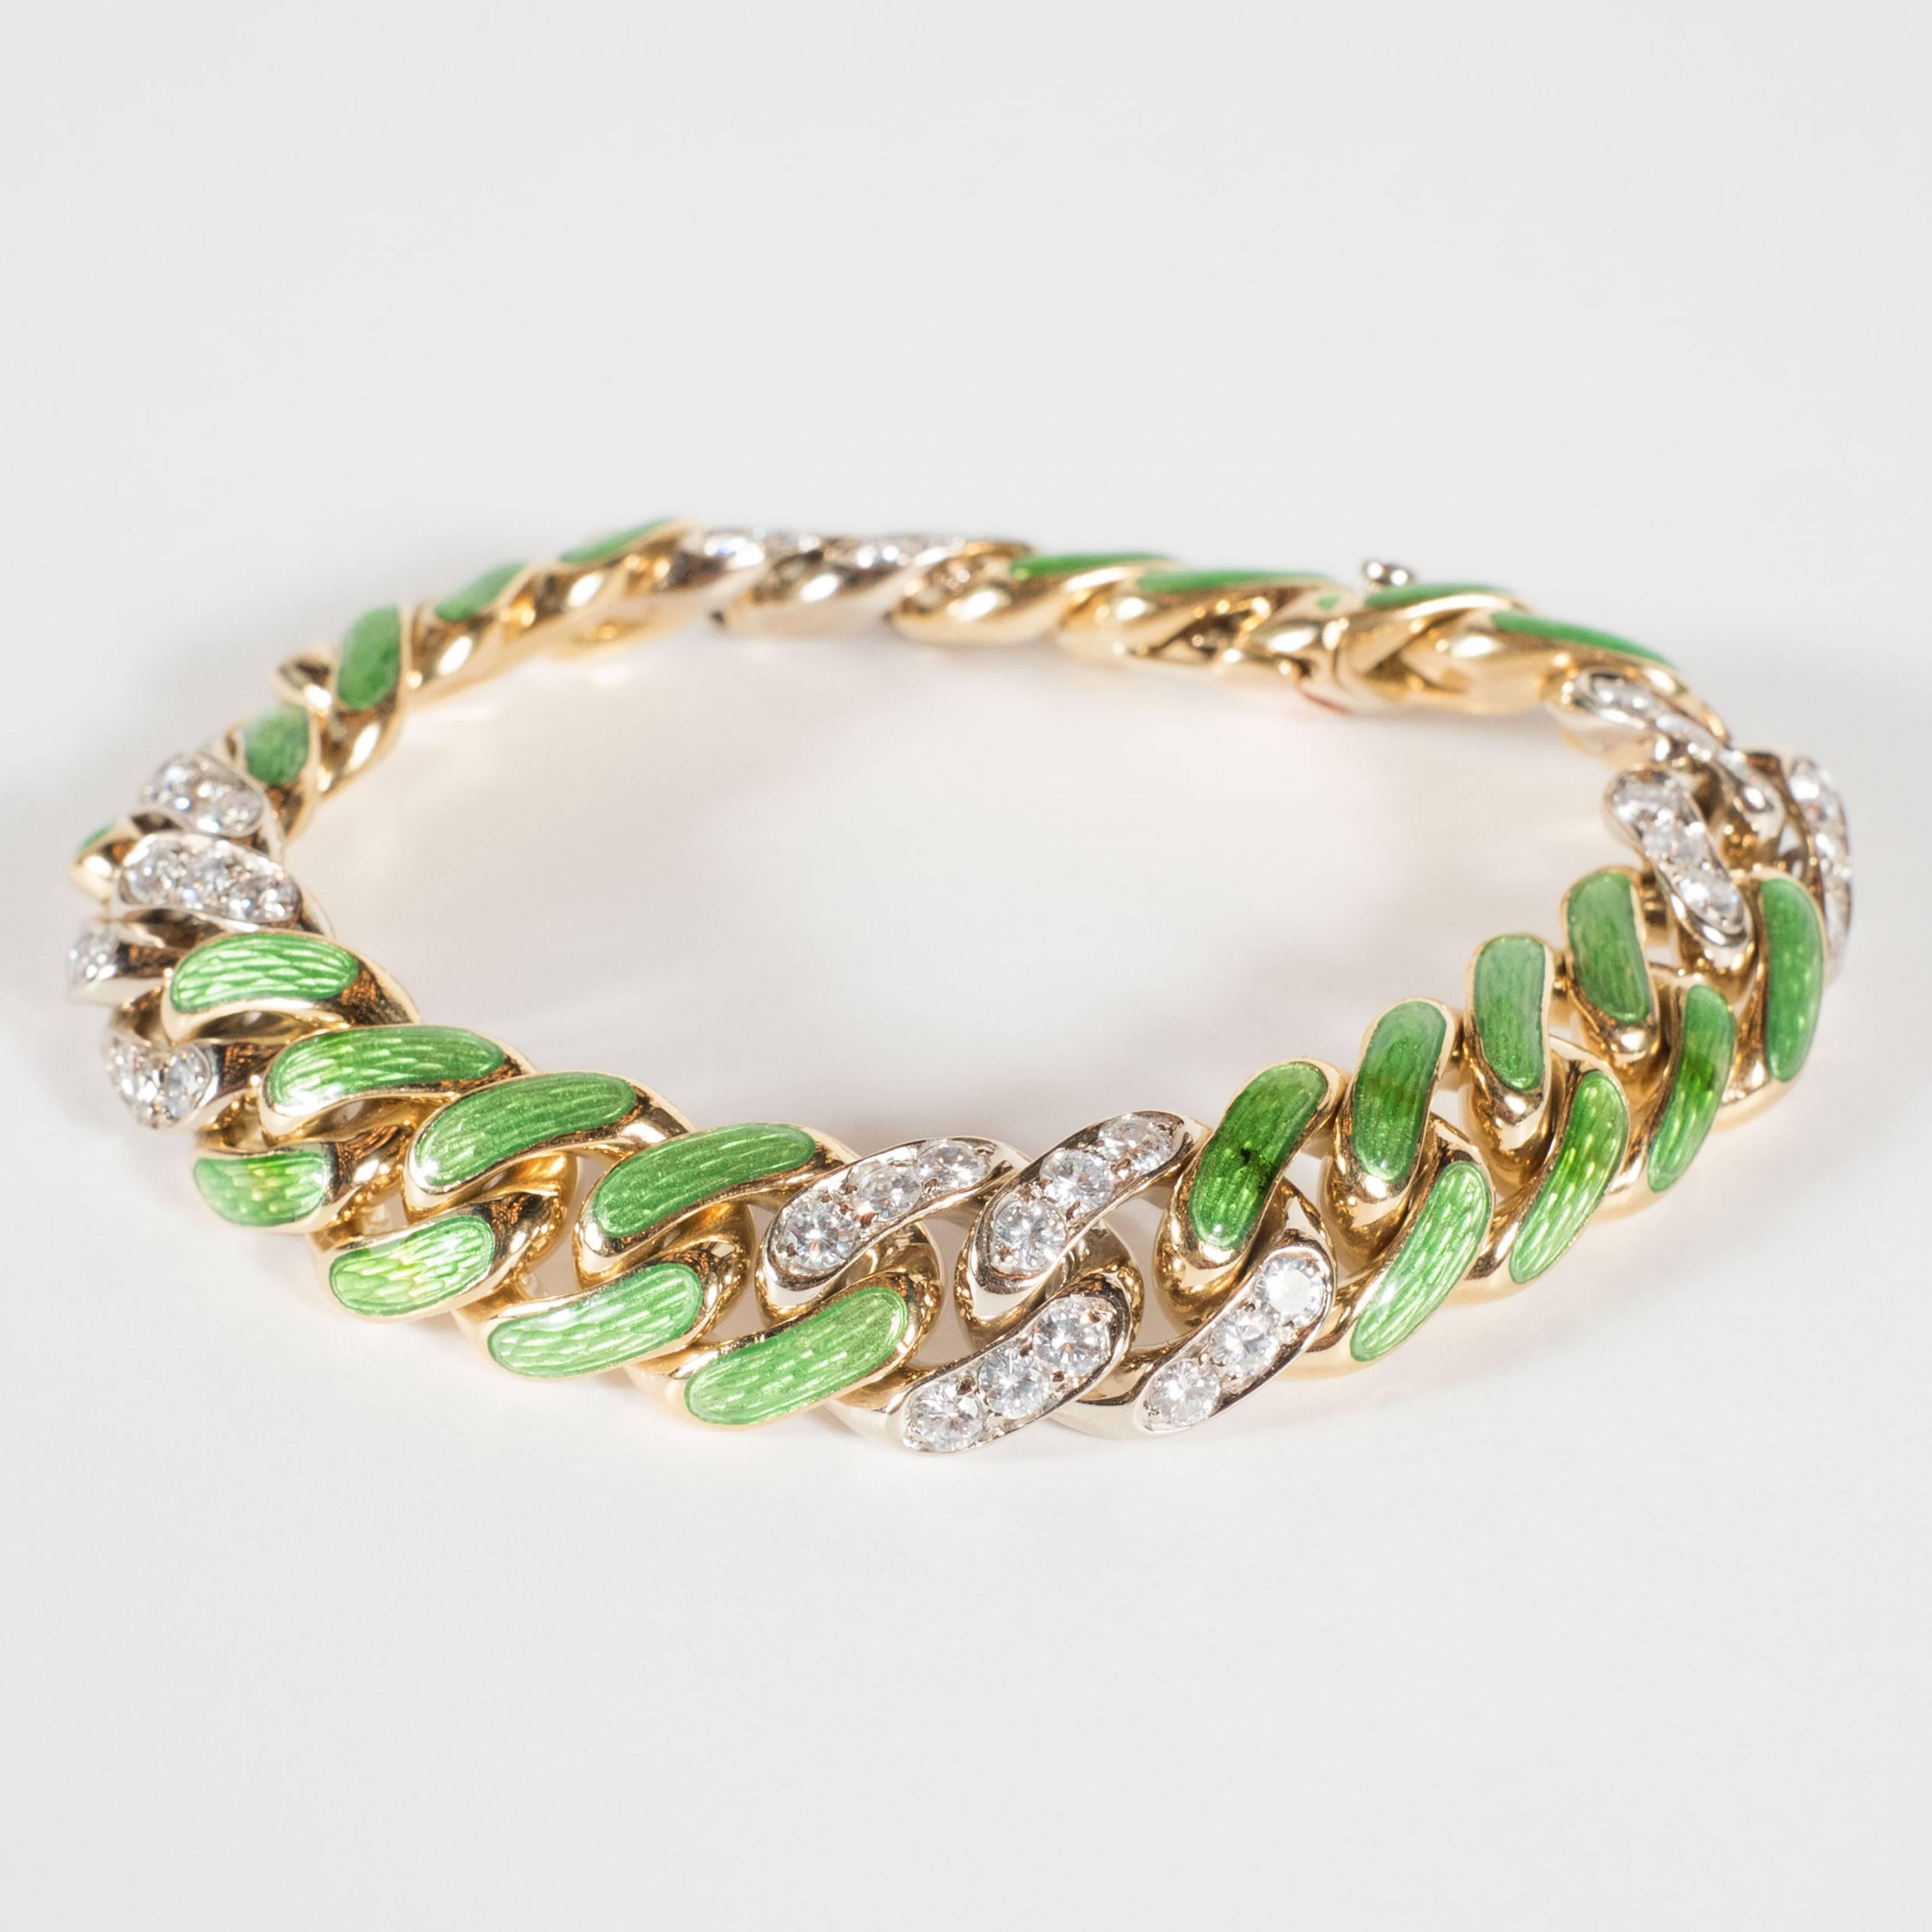 This exquisite bracelet features 24 links of 18k yellow gold . Eight of the links are set with 48 fine full cut diamonds of approximately 1.25 carats , the others are are hand applied green enameled .This bracelet was purchased at Bulgari in Rome in